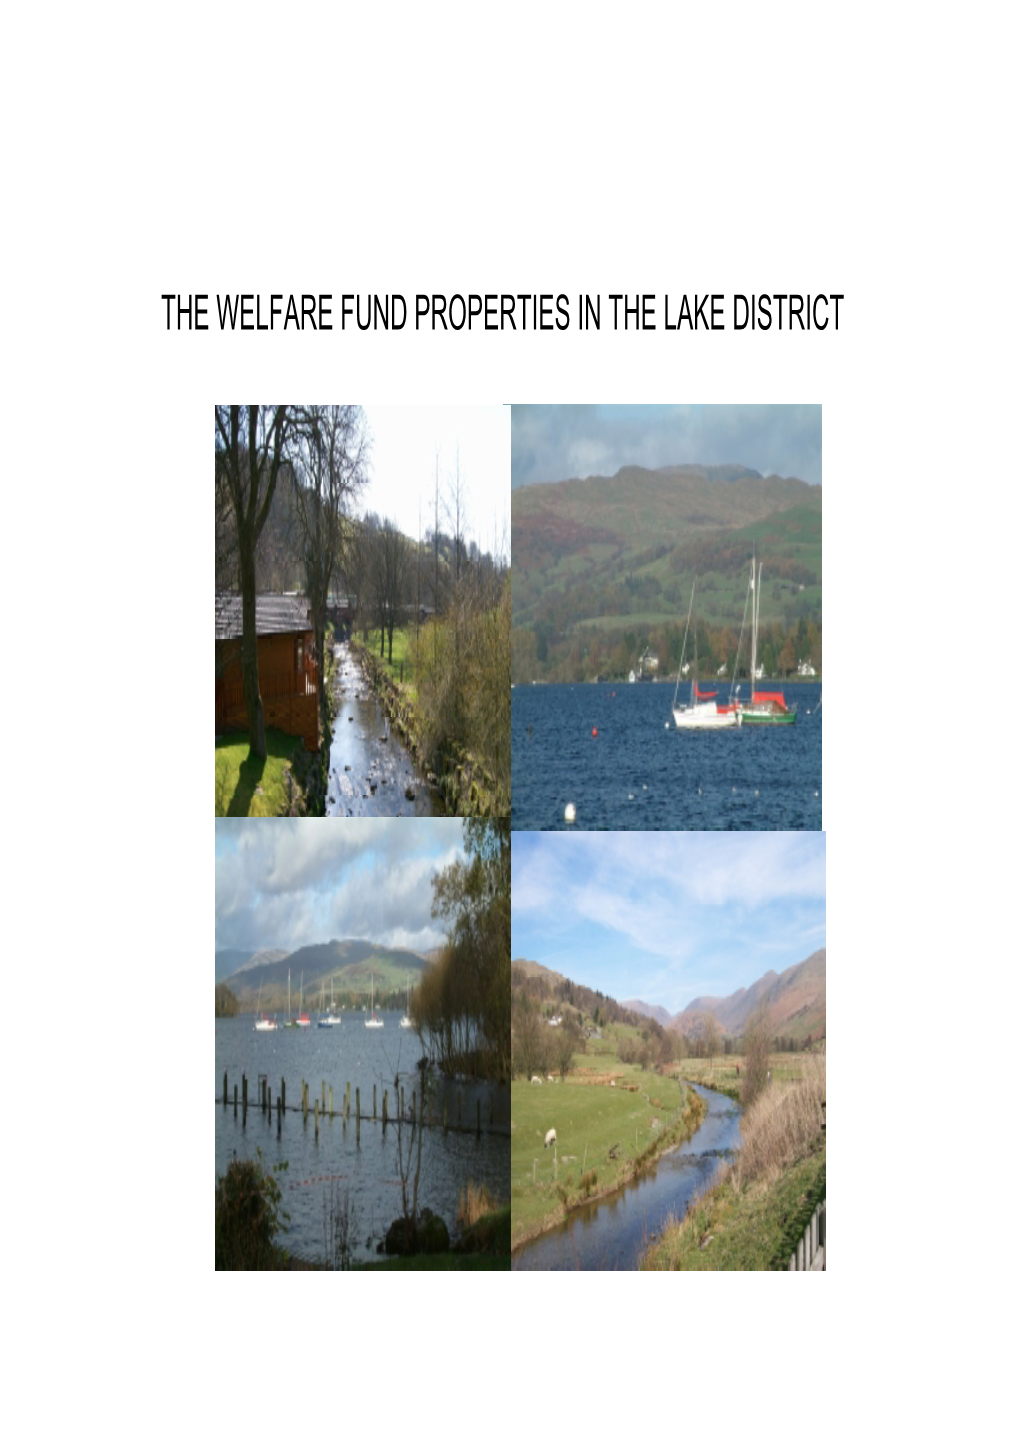 The Welfare Fund Properties in the Lake District Bookings